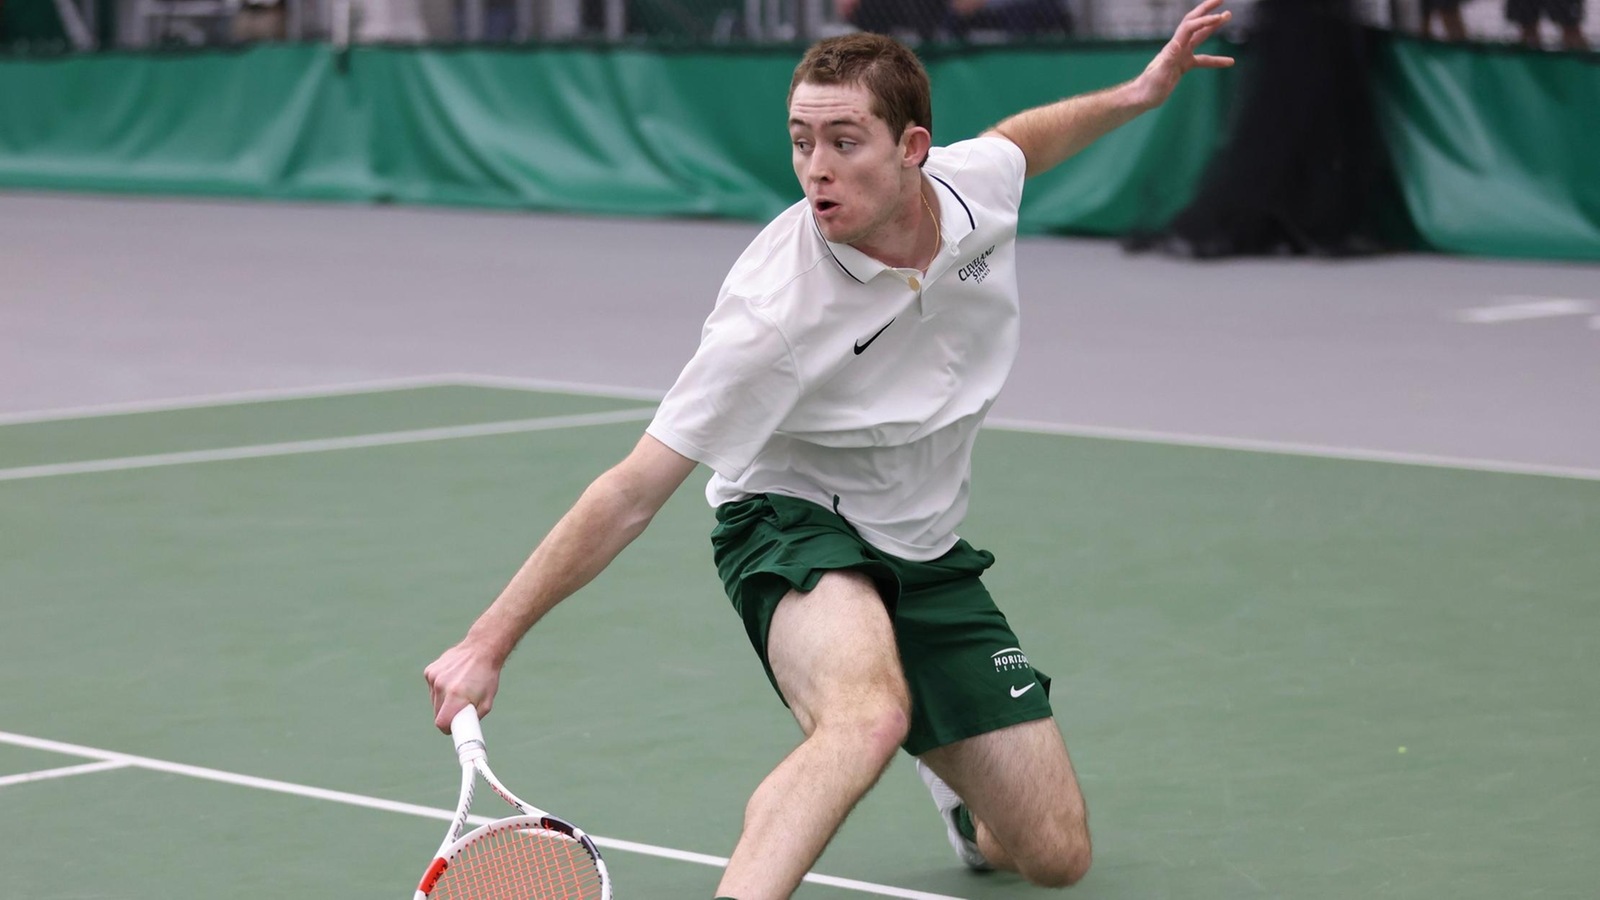 Cleveland State Men’s Tennis Drops Hard Fought 4-3 Match At Penn State